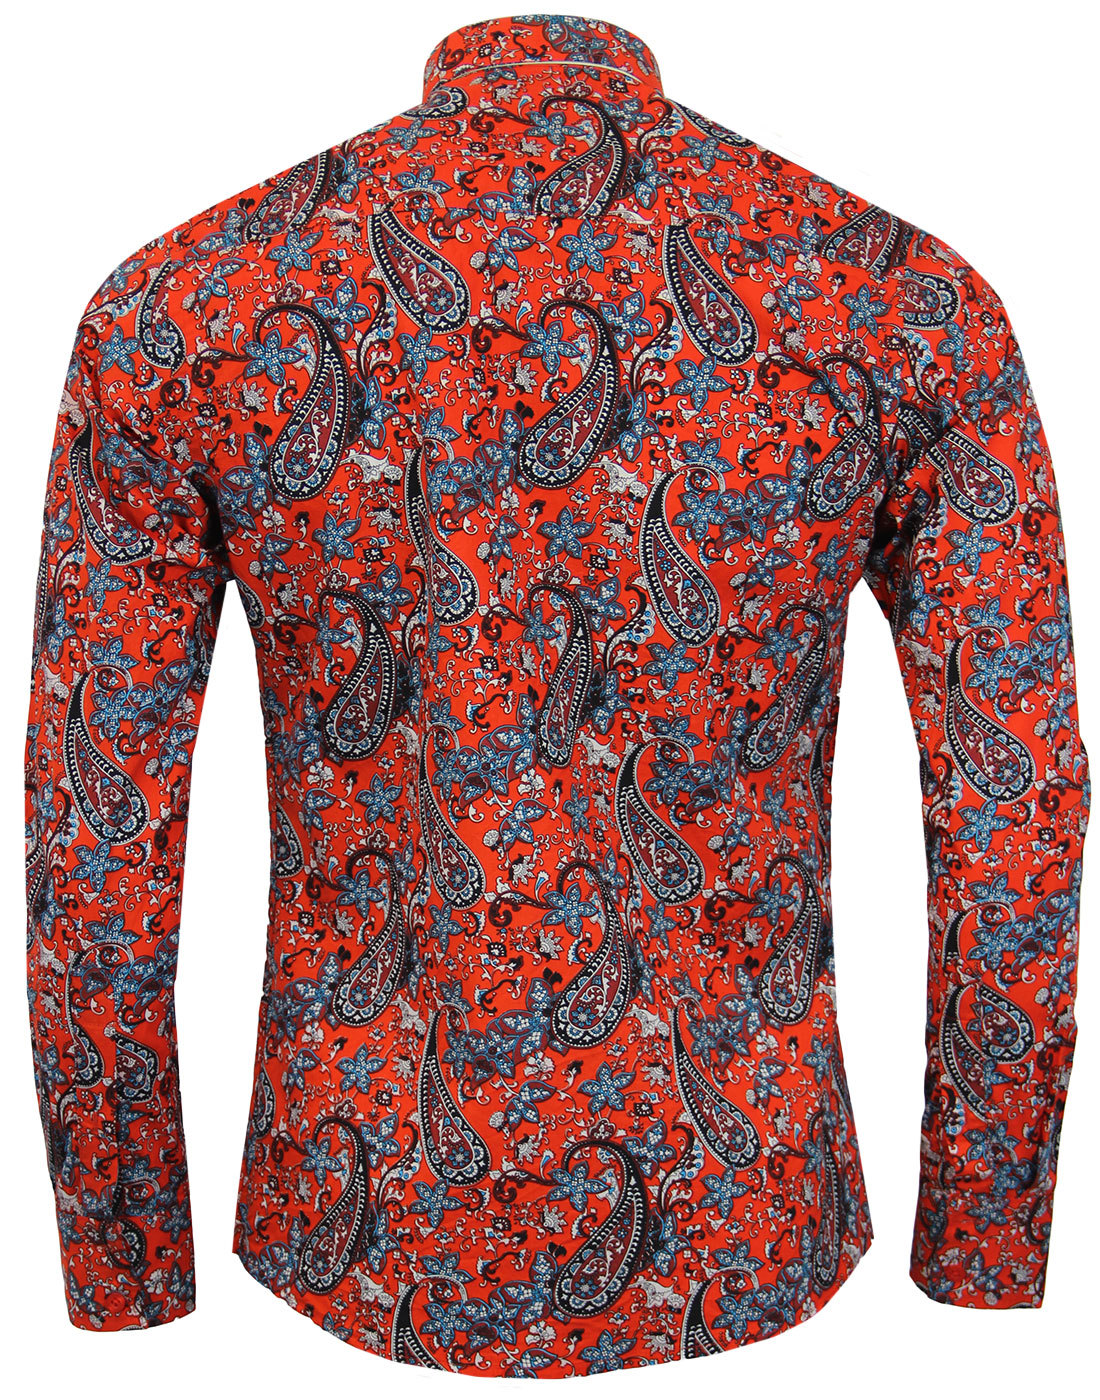 MADCAP ENGLAND Tabla Paisley Retro Psychedelic Mod Shirt in Red